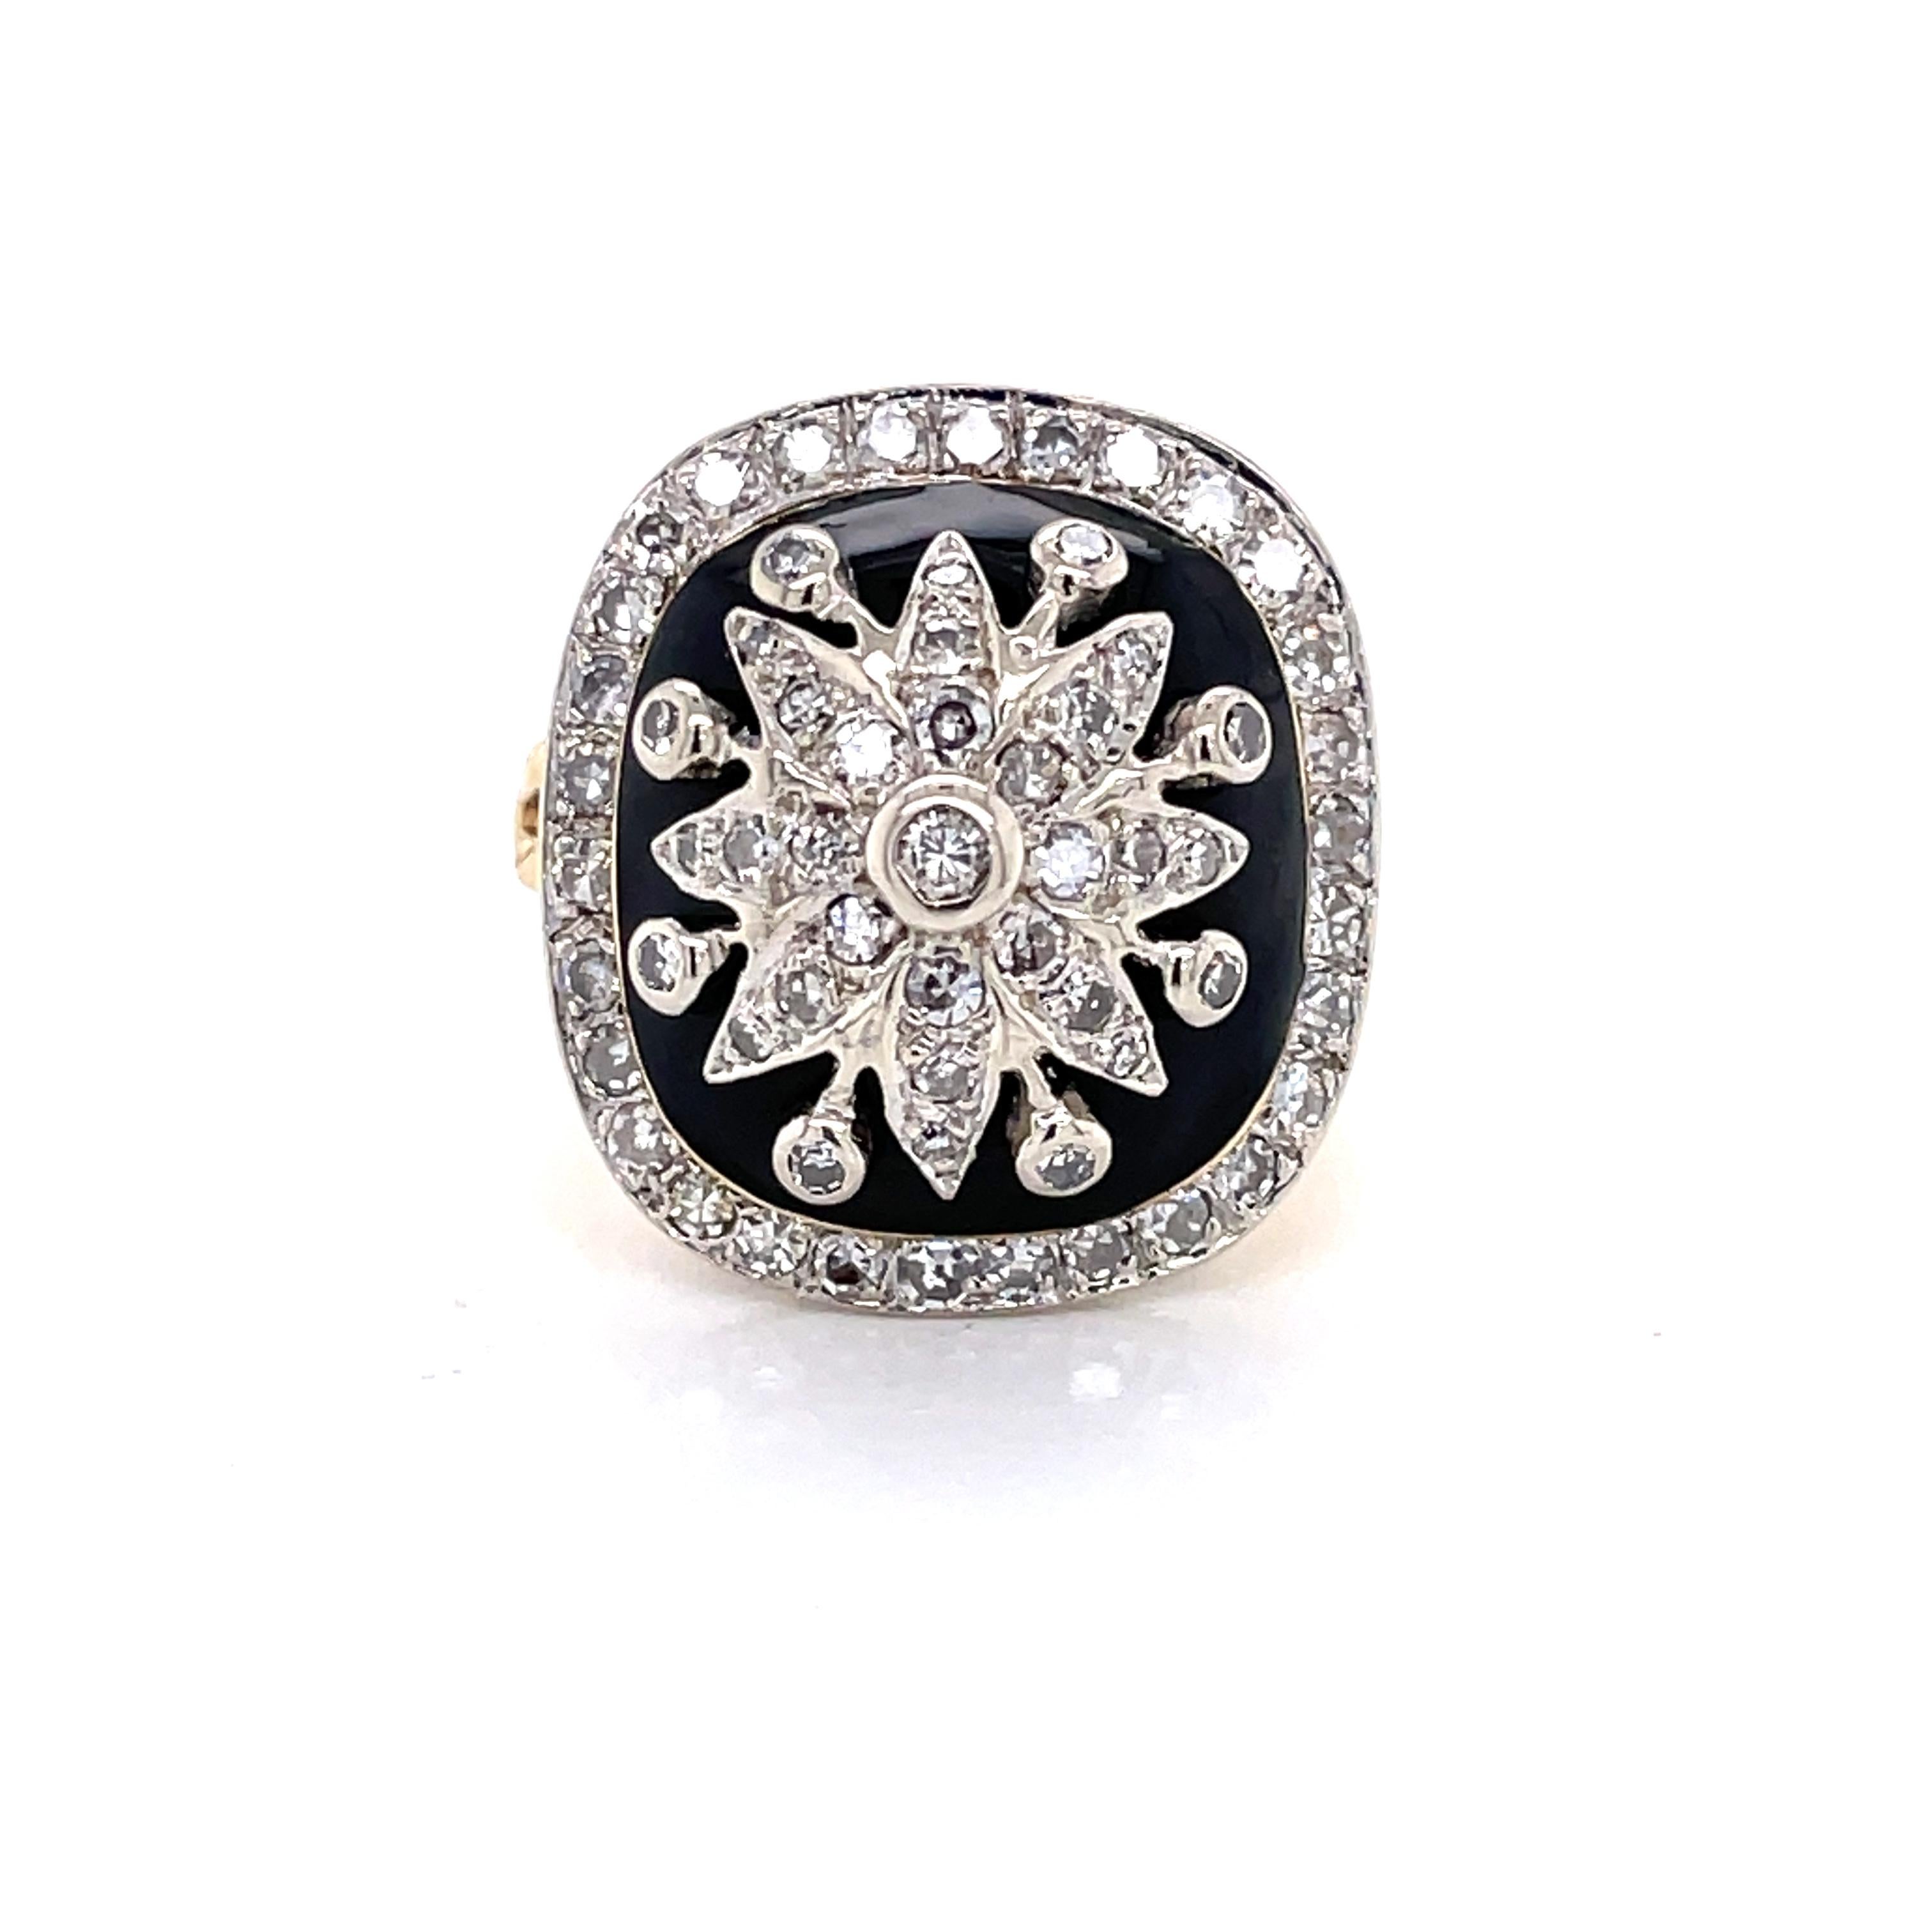 Artfully Italian and finely crafted, this impressive 14k Yellow Gold Ring features a dramatic Diamond Burst center, boldly off-set by intense Black Enamel and framed with a Yellow Gold and Diamond Border.  In size 7, this spectacular .75 ct Diamond